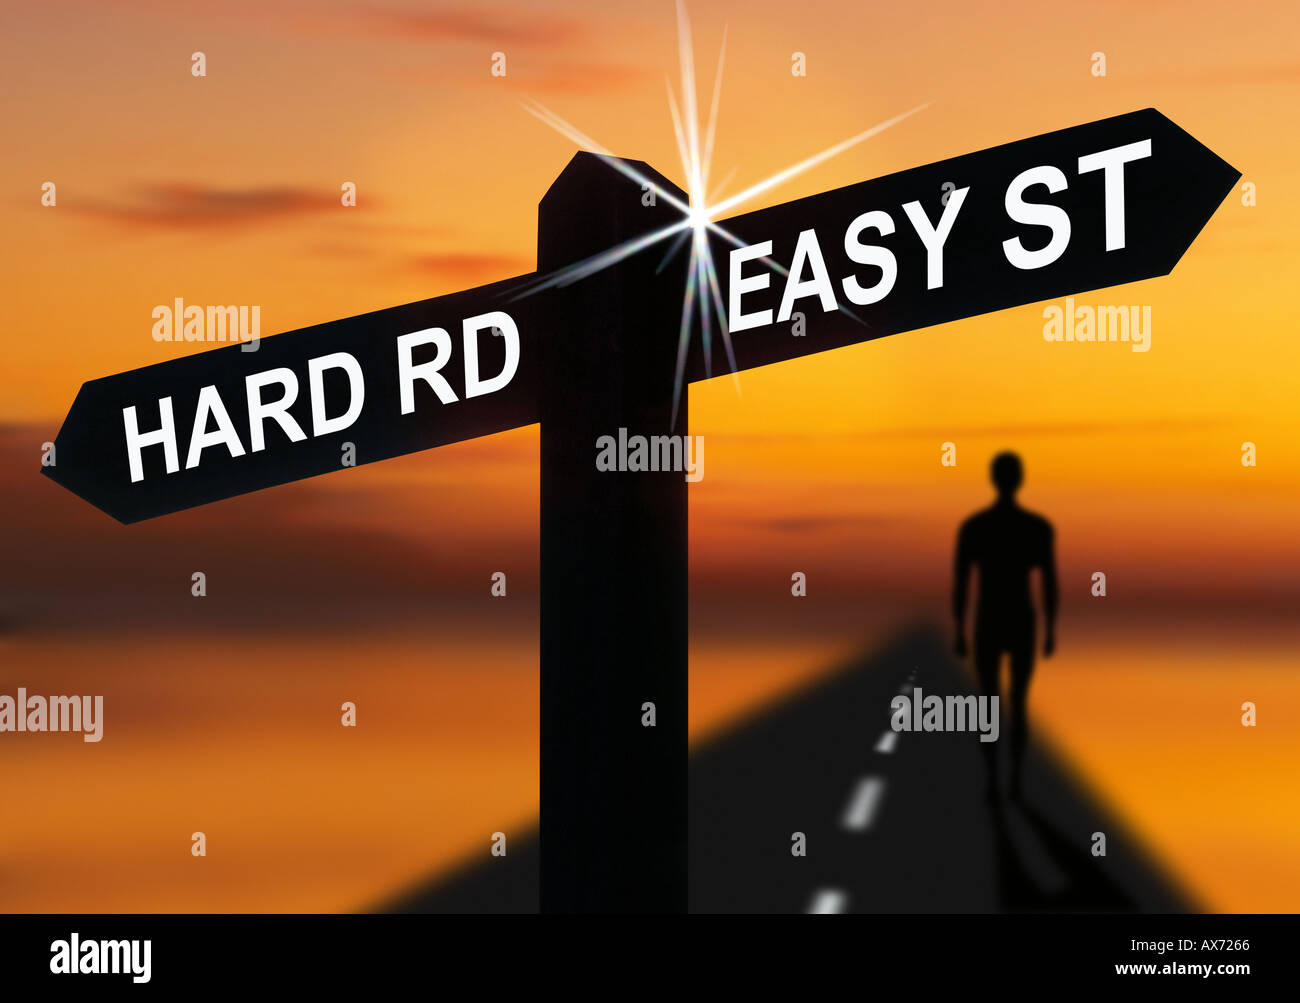 Signpost pointing in different directions to Easy Street and Hard Road with man walking forward towards horizon Stock Photo